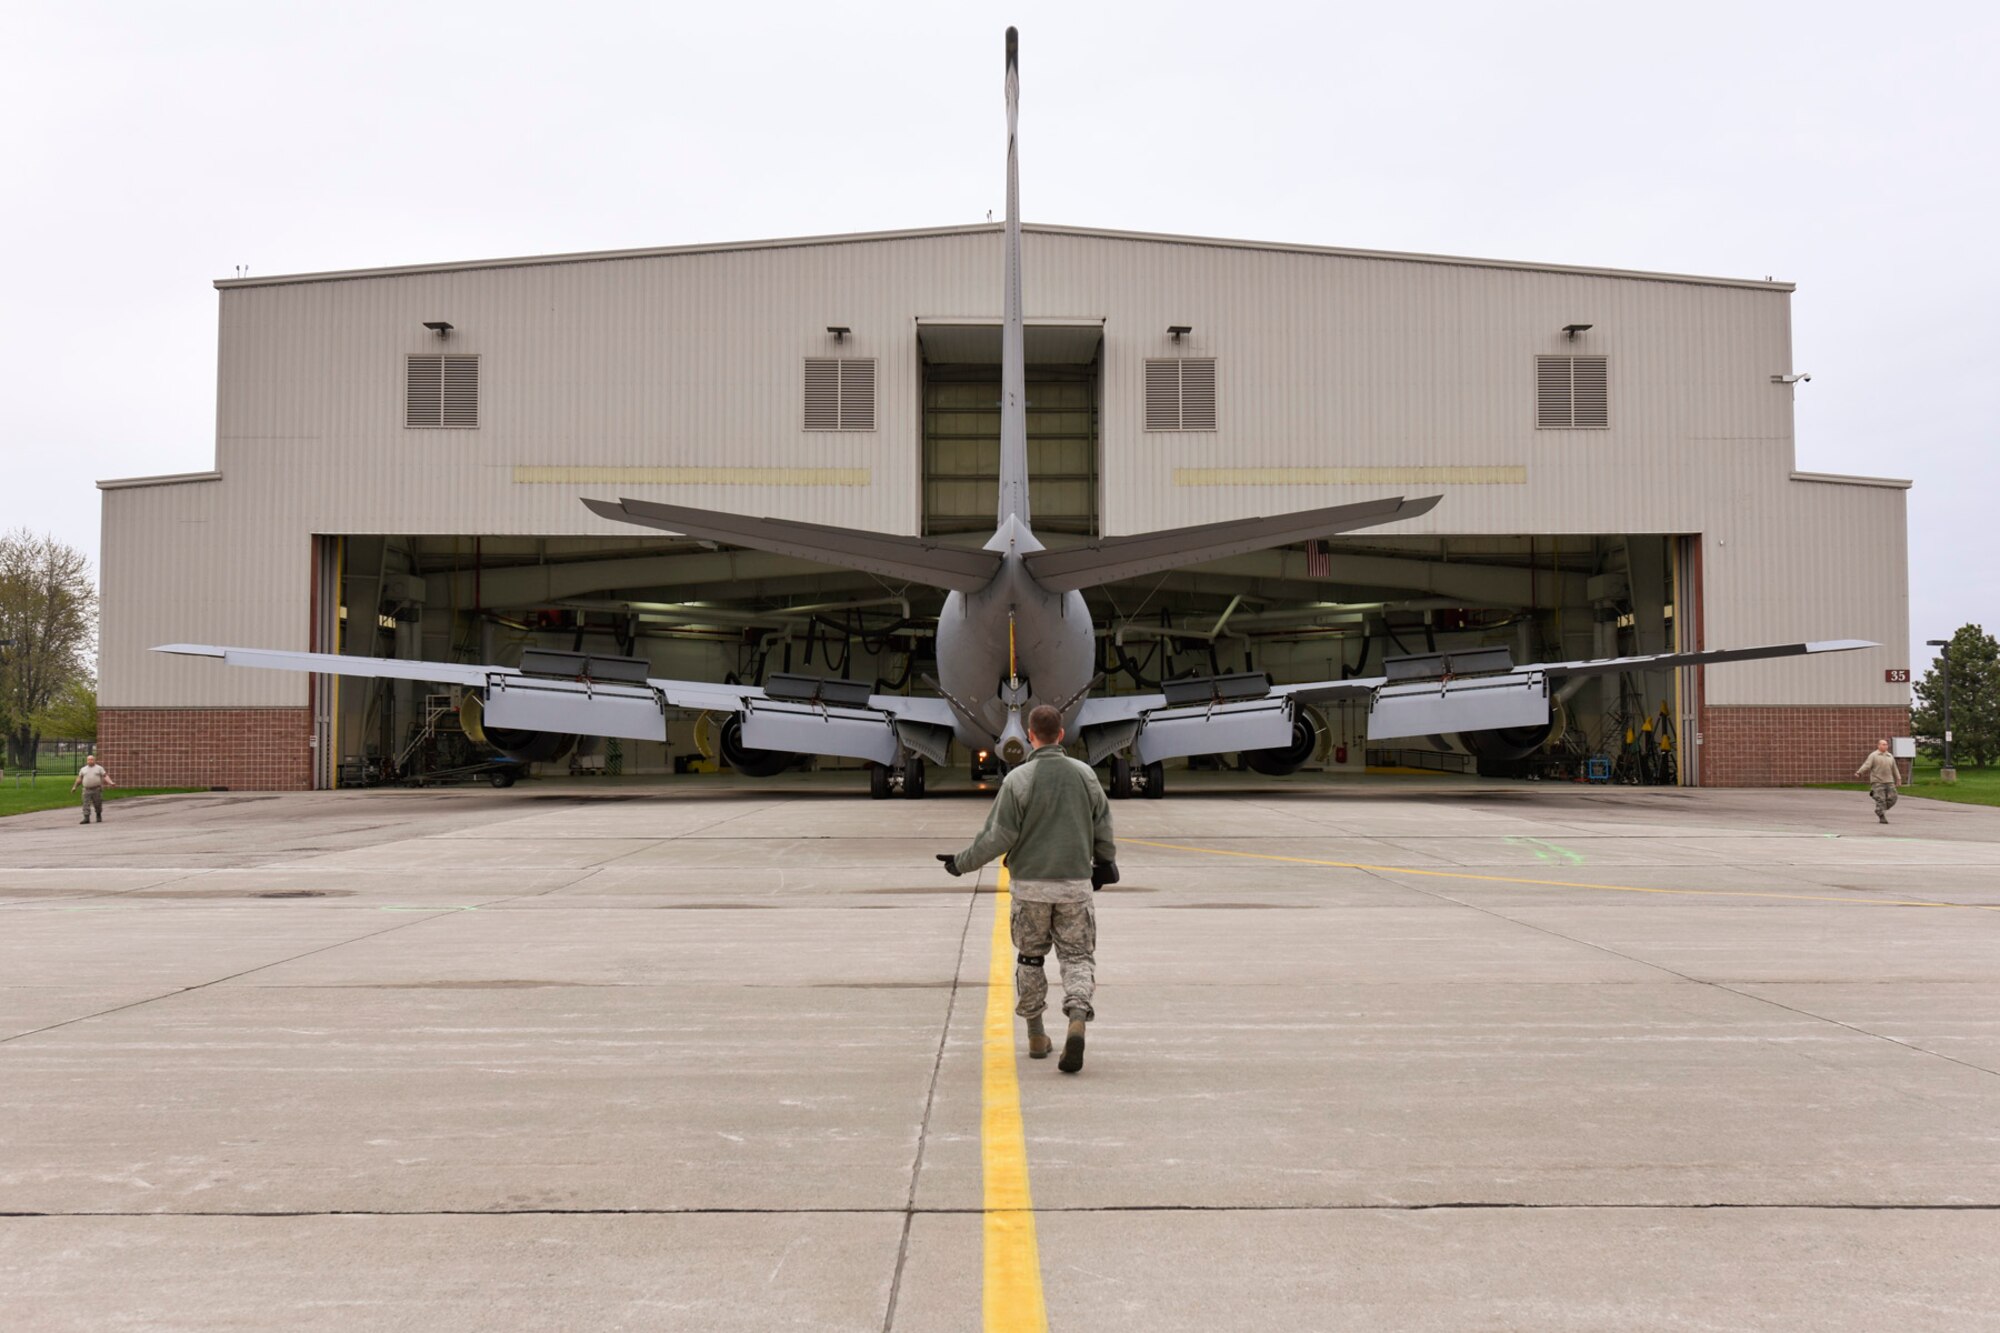 150506-Z-MI929-008 – A Michigan Air National Guard KC-135 Stratotanker is pushed out of the hangar after completing an isochronal inspection at Selfridge Air National Guard Base, Mich., May 6, 2015. An ISO is a major inspection of all of the aircraft’s systems. (U.S. Air National Guard photo by Terry Atwell.)